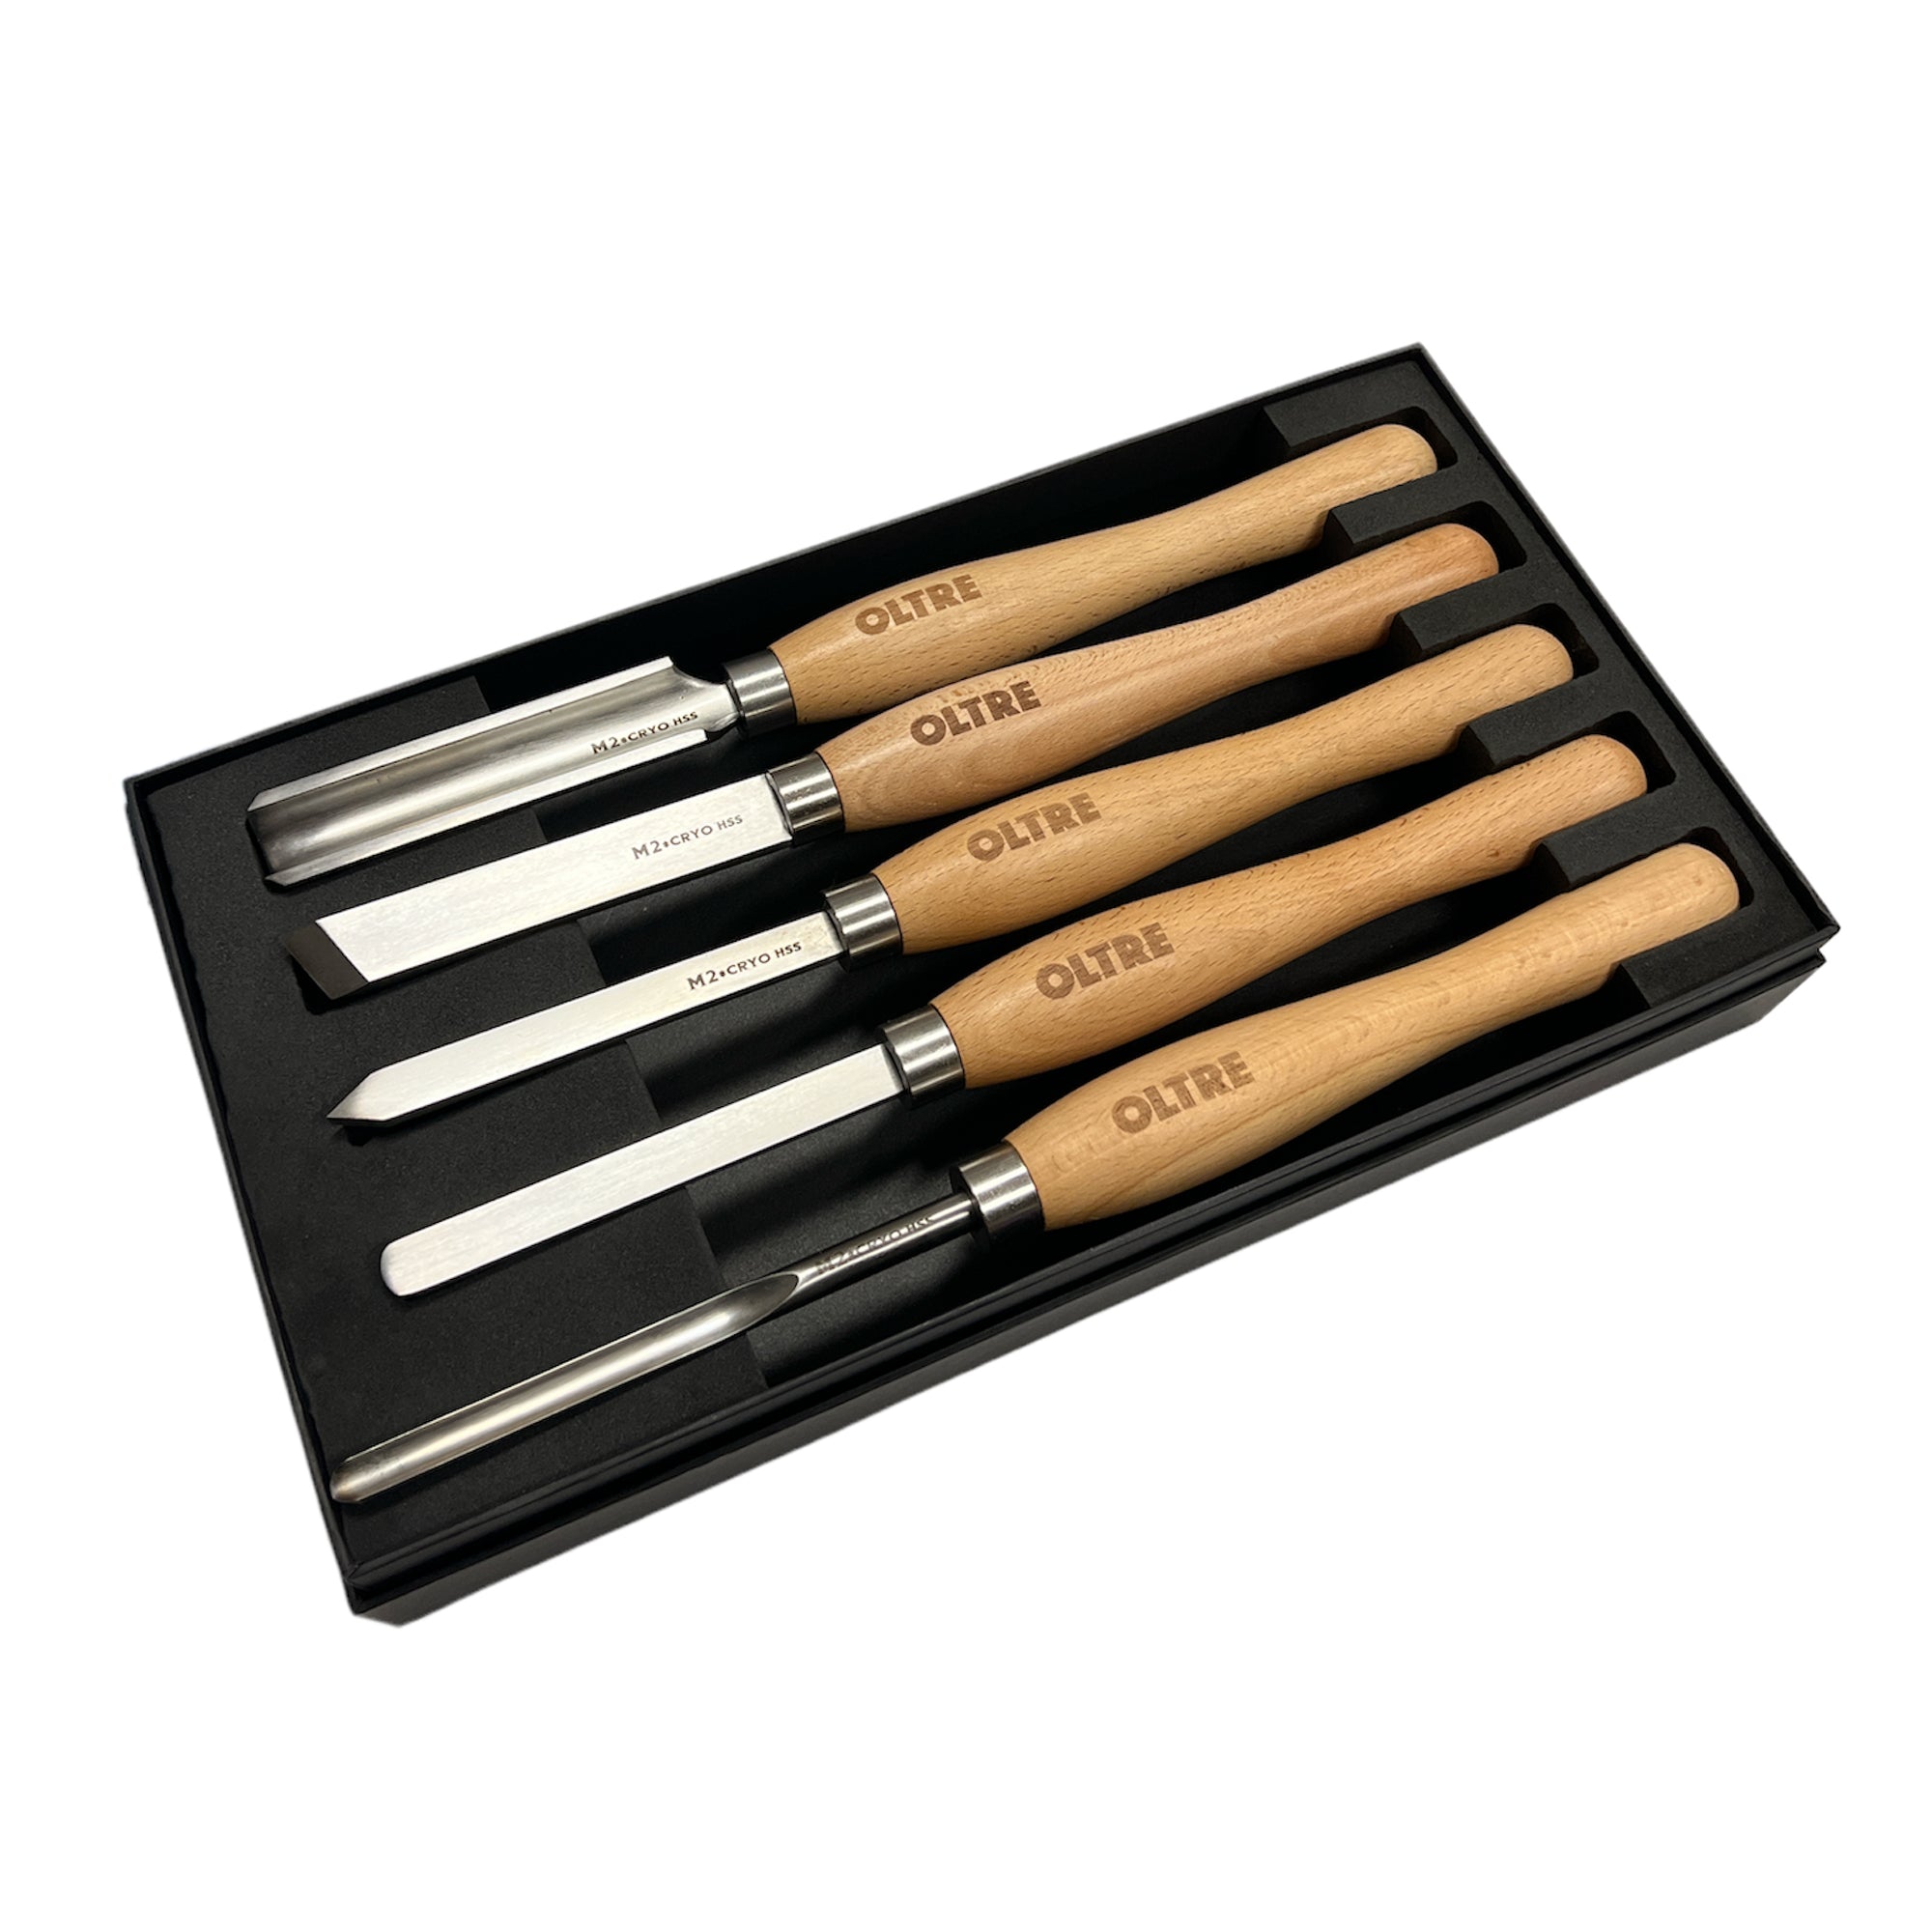 5Pce Woodturning Chisel Tool M2 CRYO HSS (5 Small Turning Tool) Set by Oltre